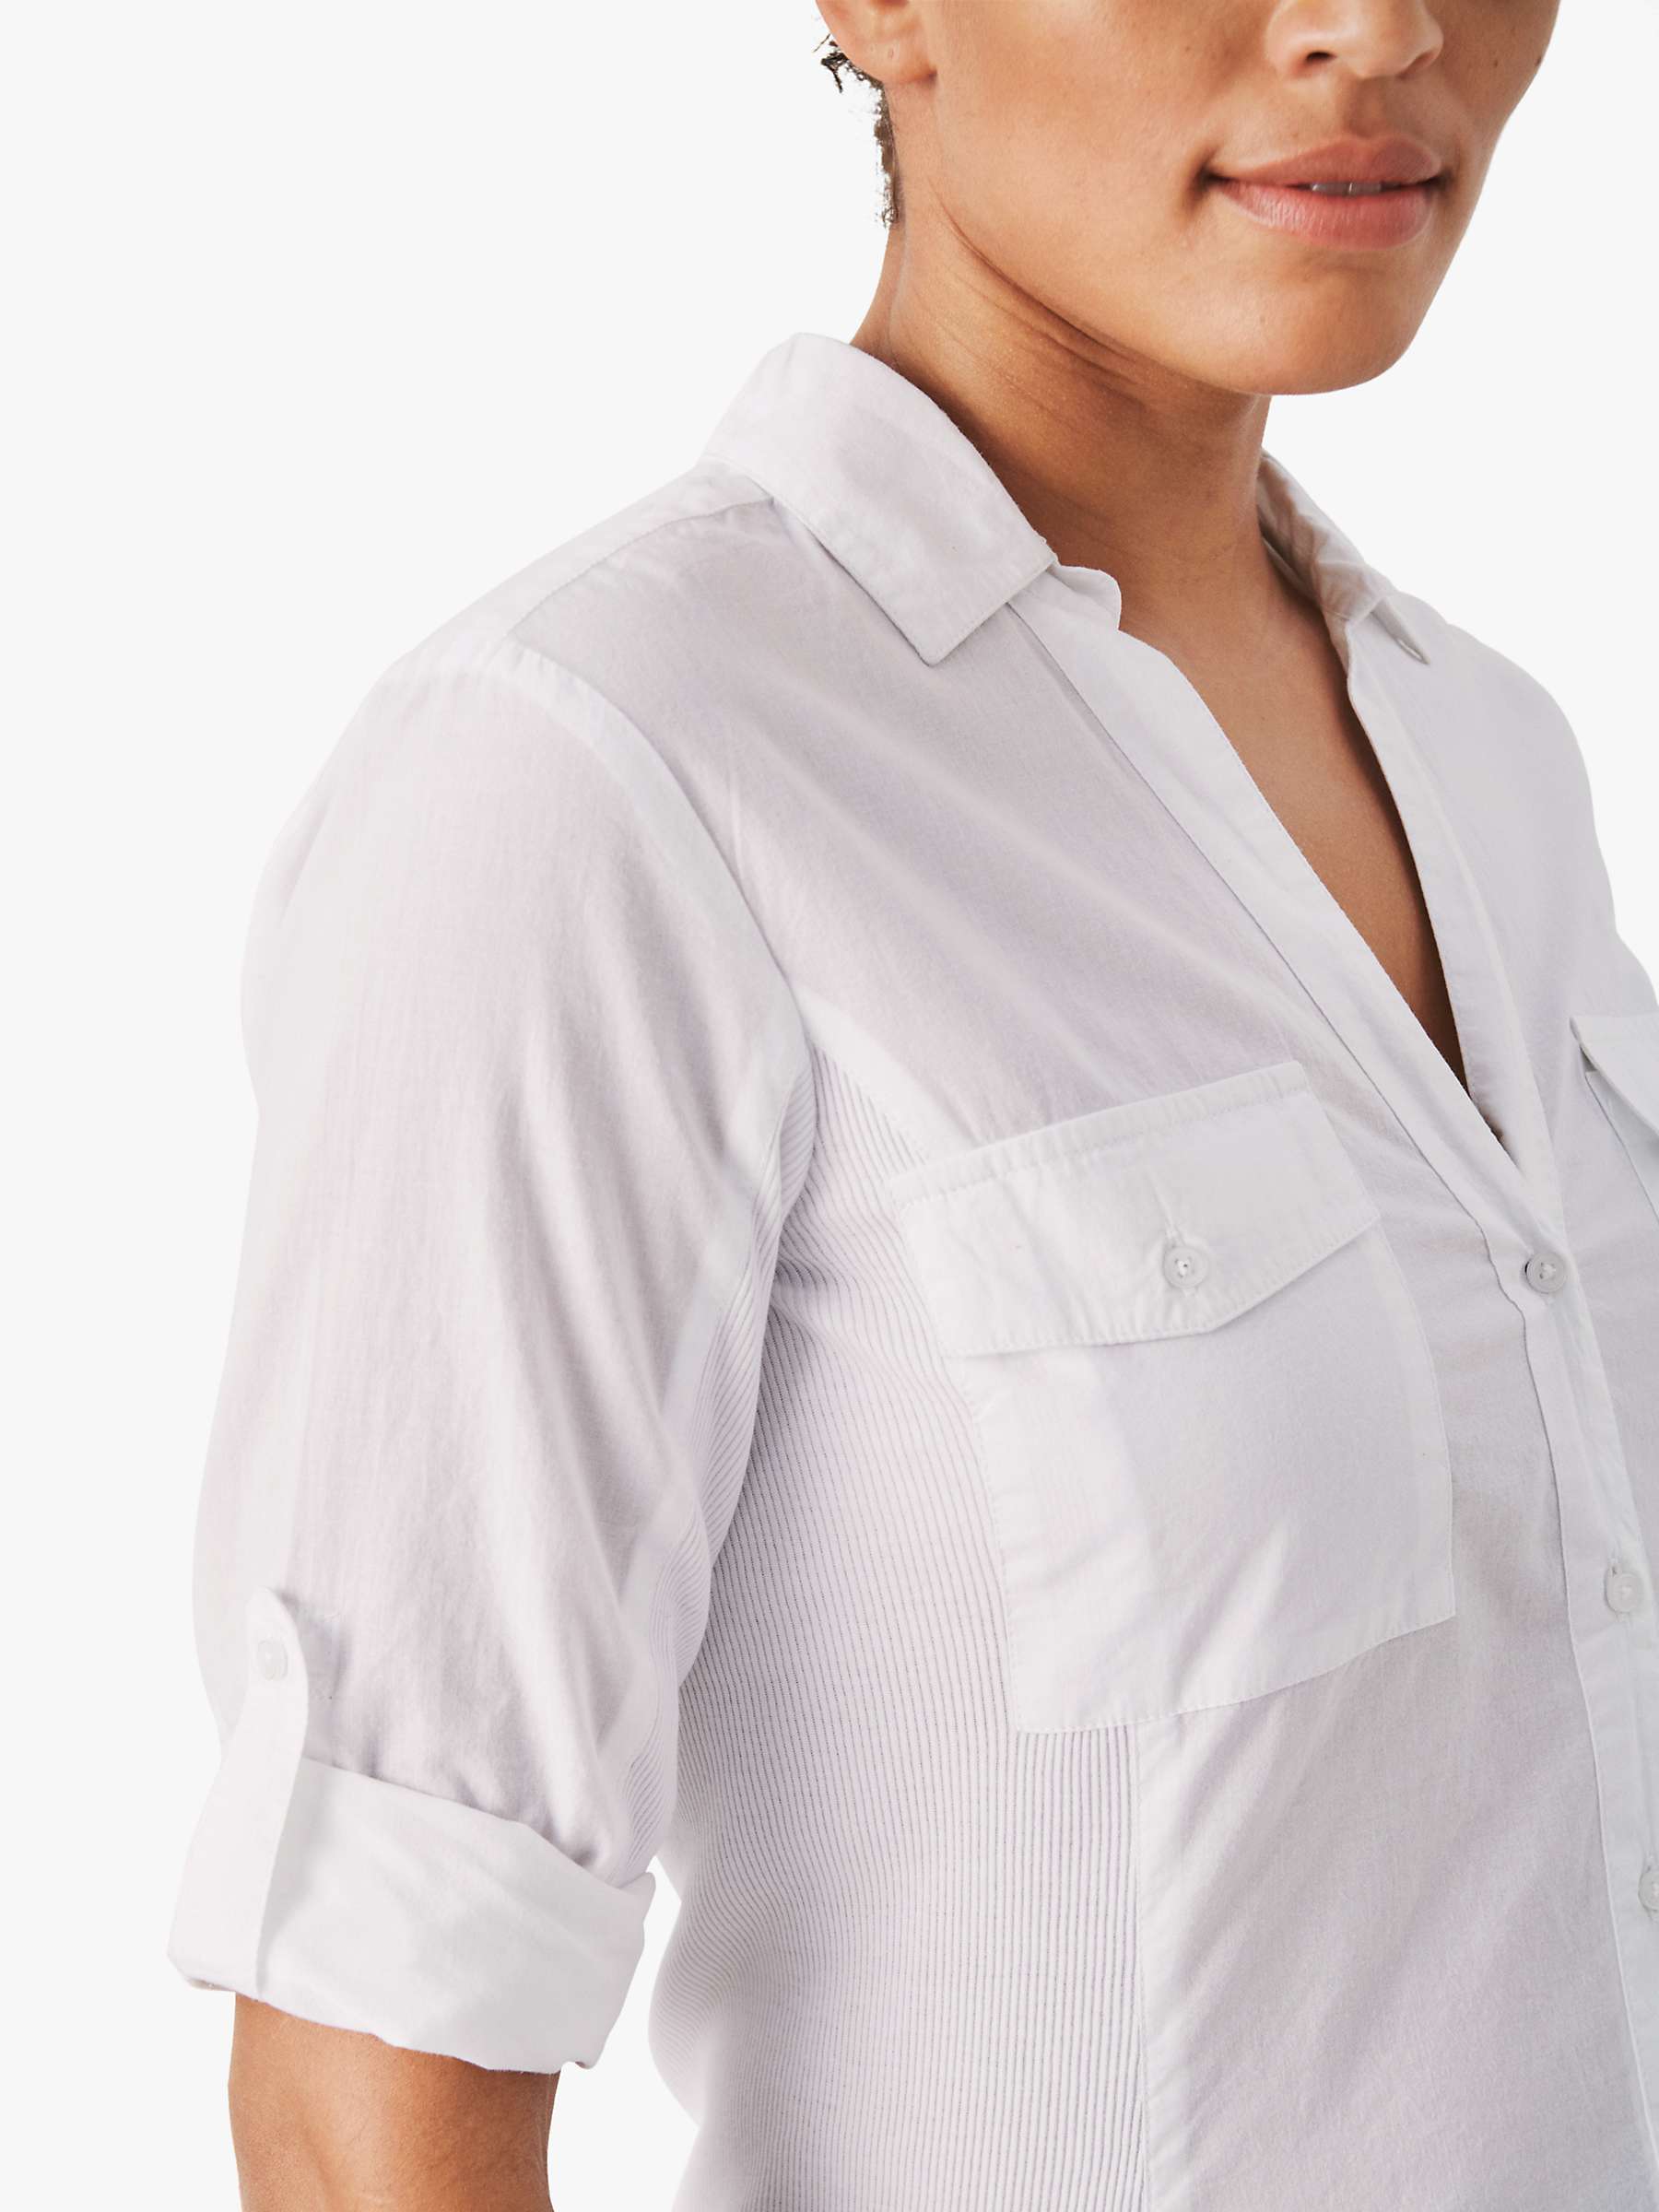 Buy Part Two Cortnia Fitted Shirt Online at johnlewis.com